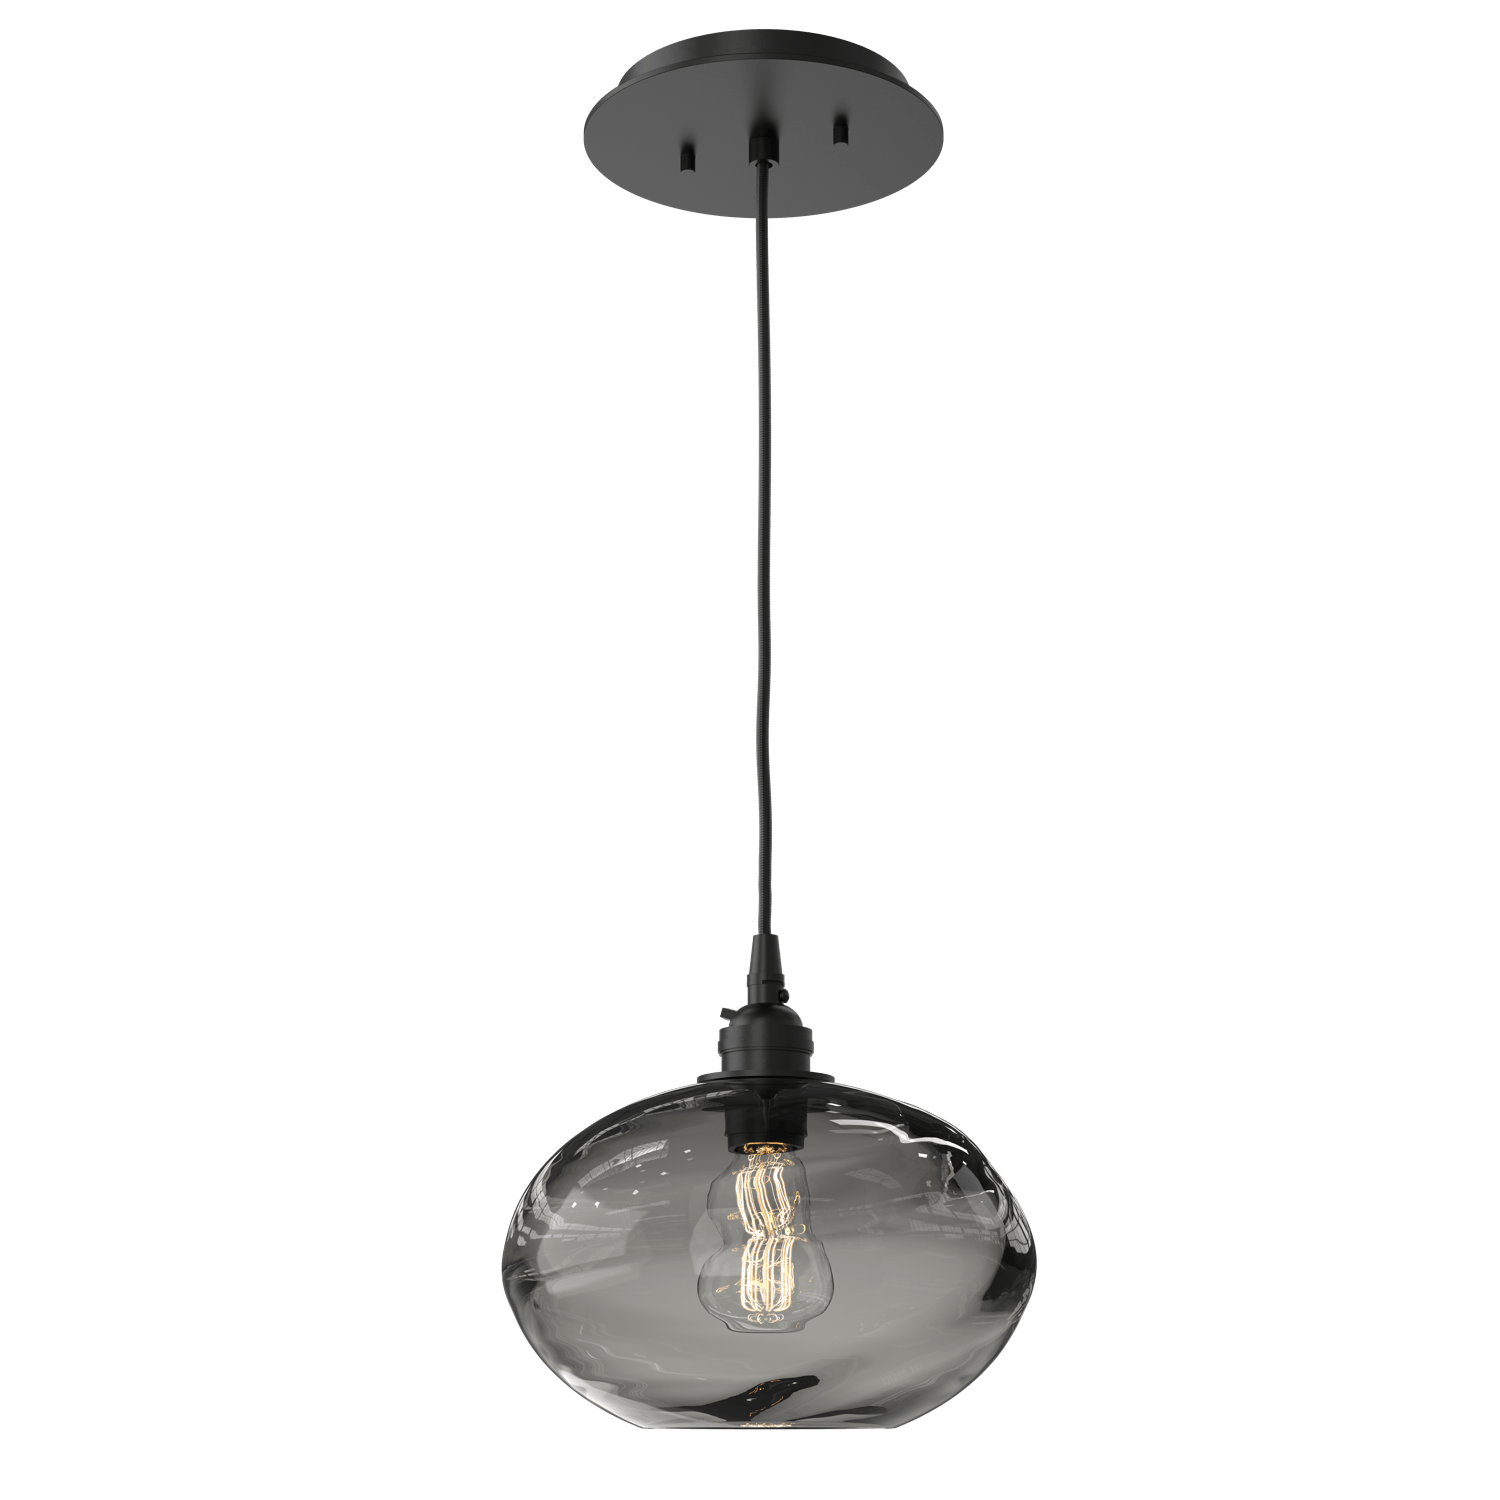 LAB0036-01-MB-OS-Hammerton-Studio-Optic-Blown-Glass-Coppa-pendant-light-with-matte-black-finish-and-optic-smoke-blown-glass-shades-and-incandescent-lamping